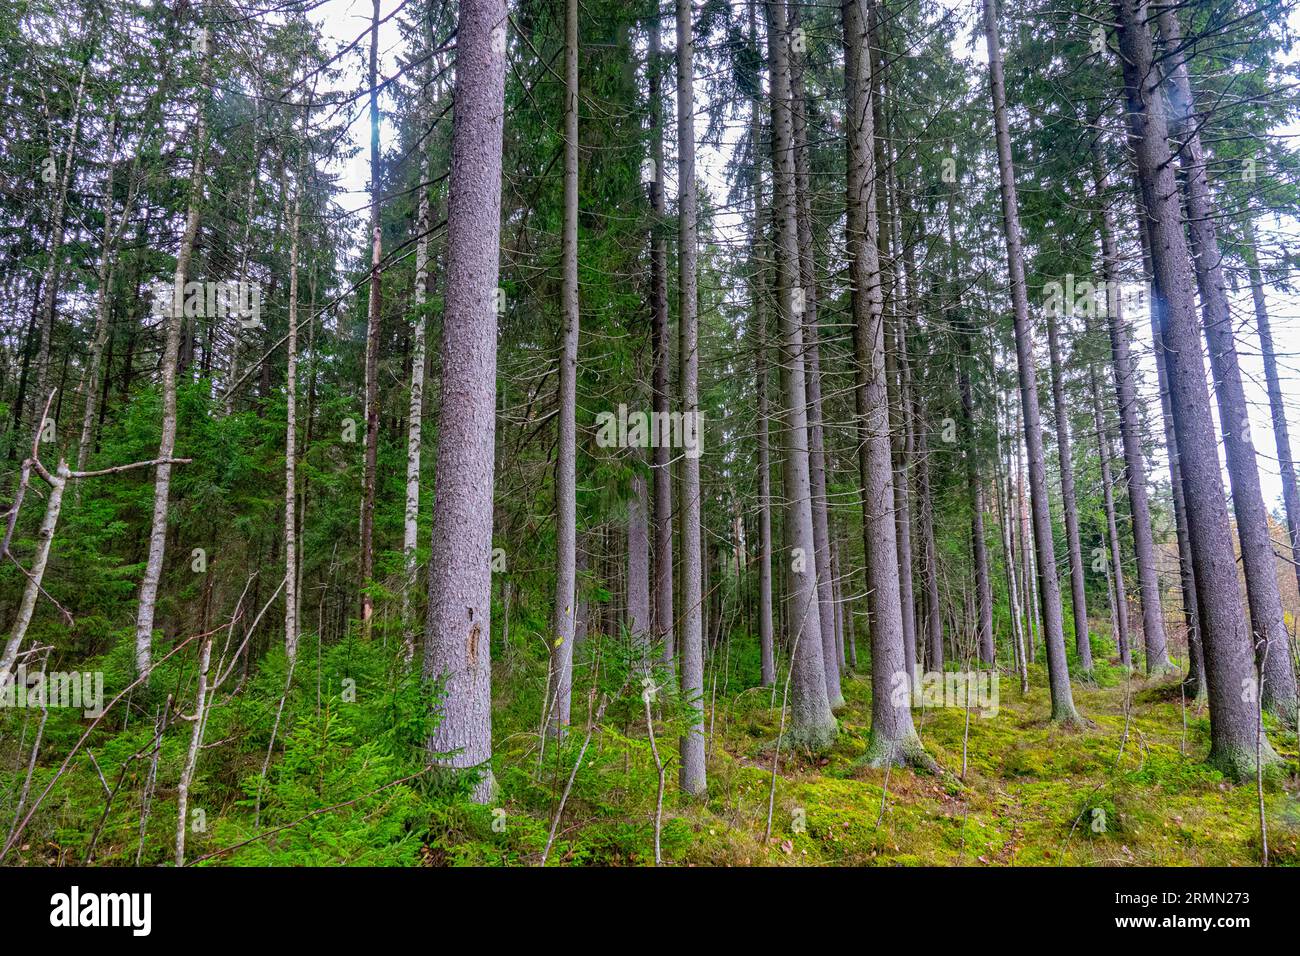 Forest science, sylviculture. Agelong timber stand of European spruce (Picea excelsa, P. abies) in the boreal forests of northeastern Europe. Woodside Stock Photo